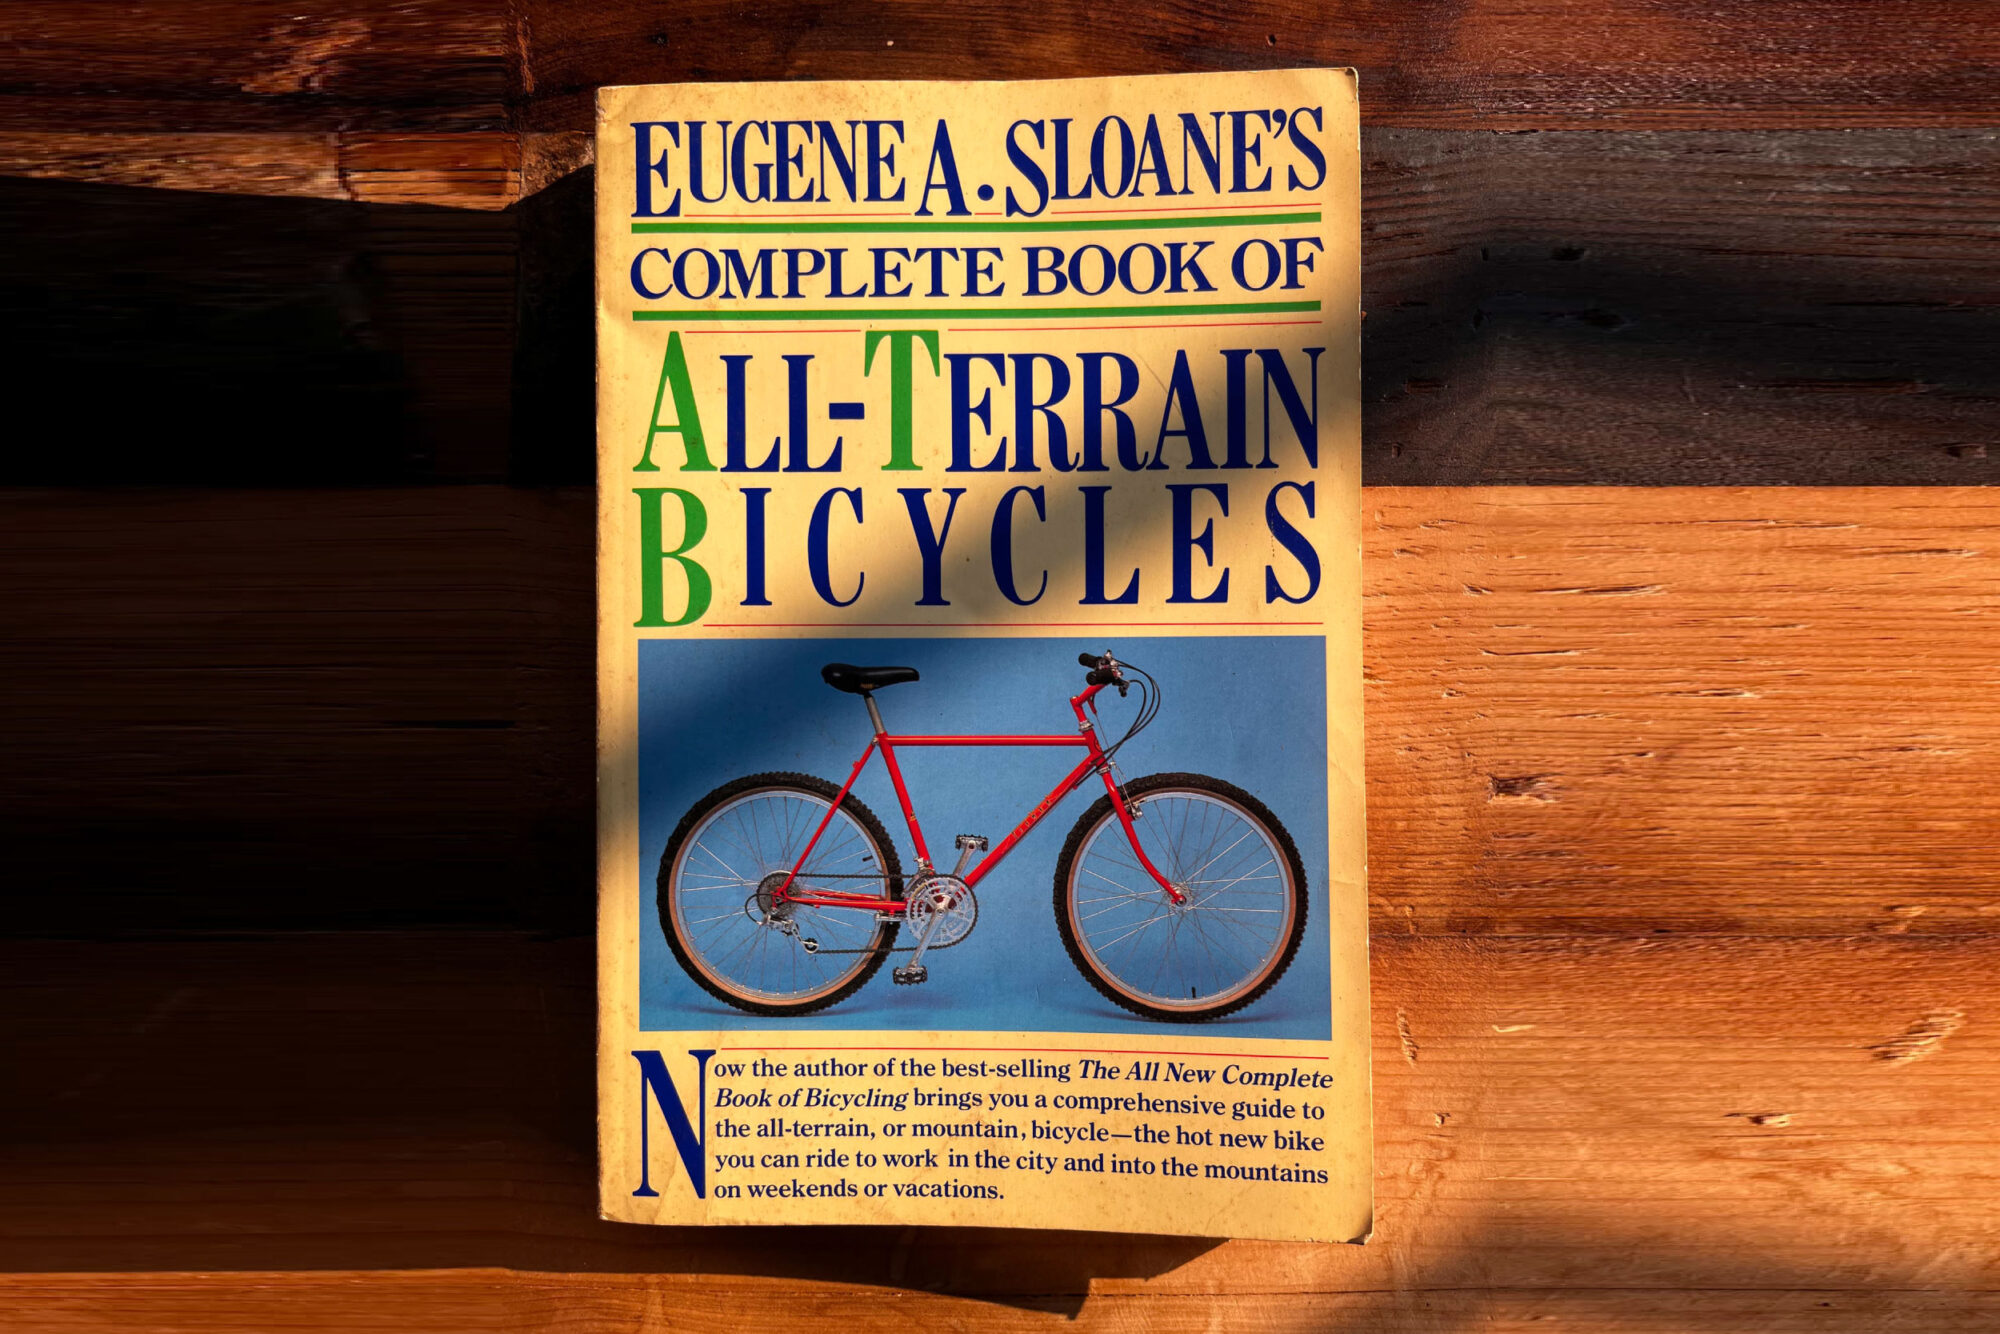 Complete Book of All-Terrain Bicycles, Eugene Sloane